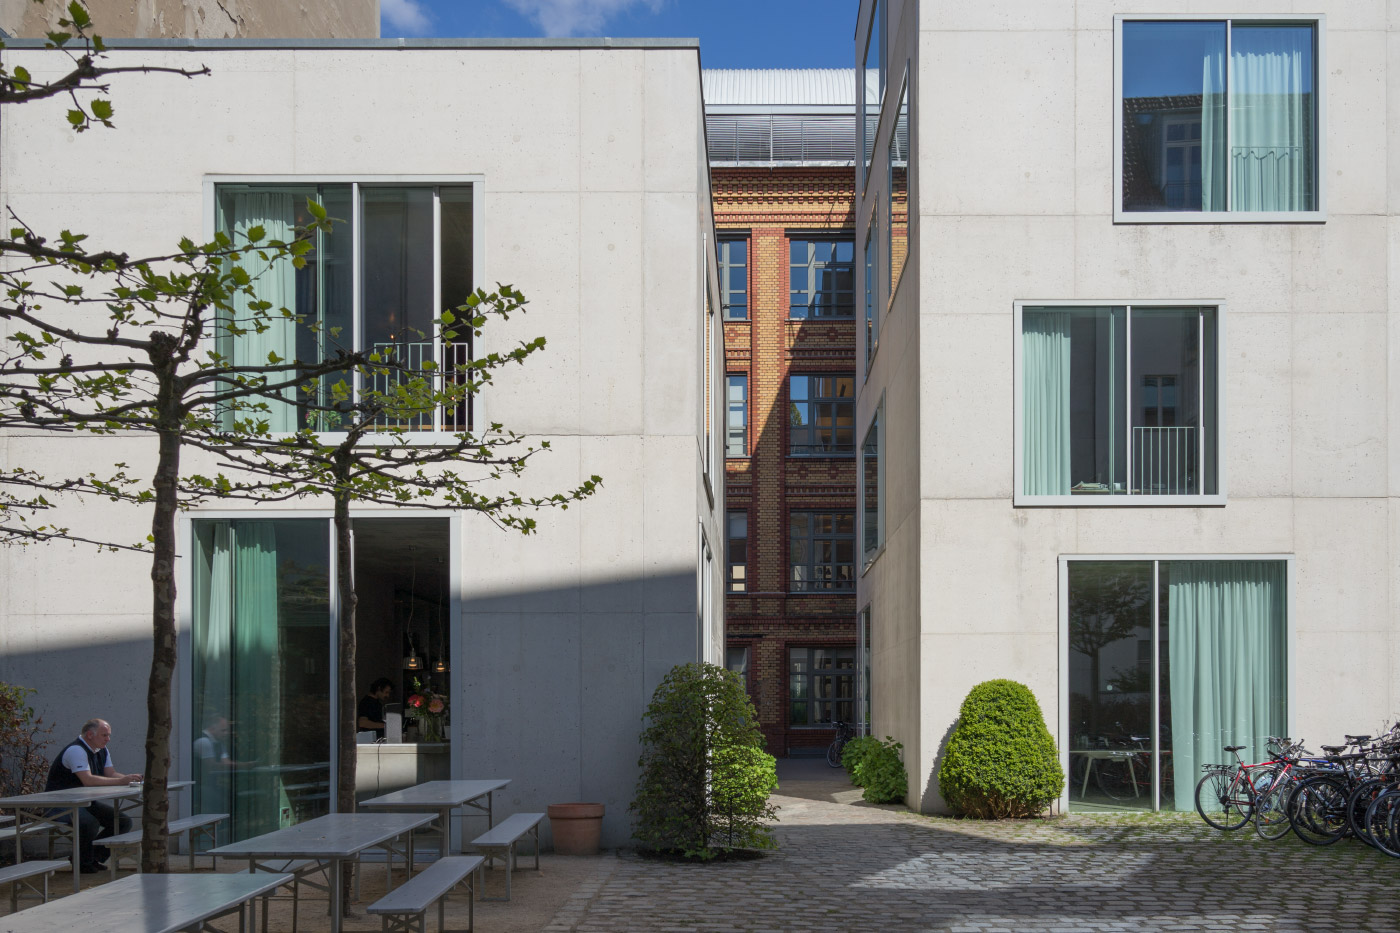 Chipperfield's Berlin office dialogues with the Chipperfield-designed Kantine in front of it.